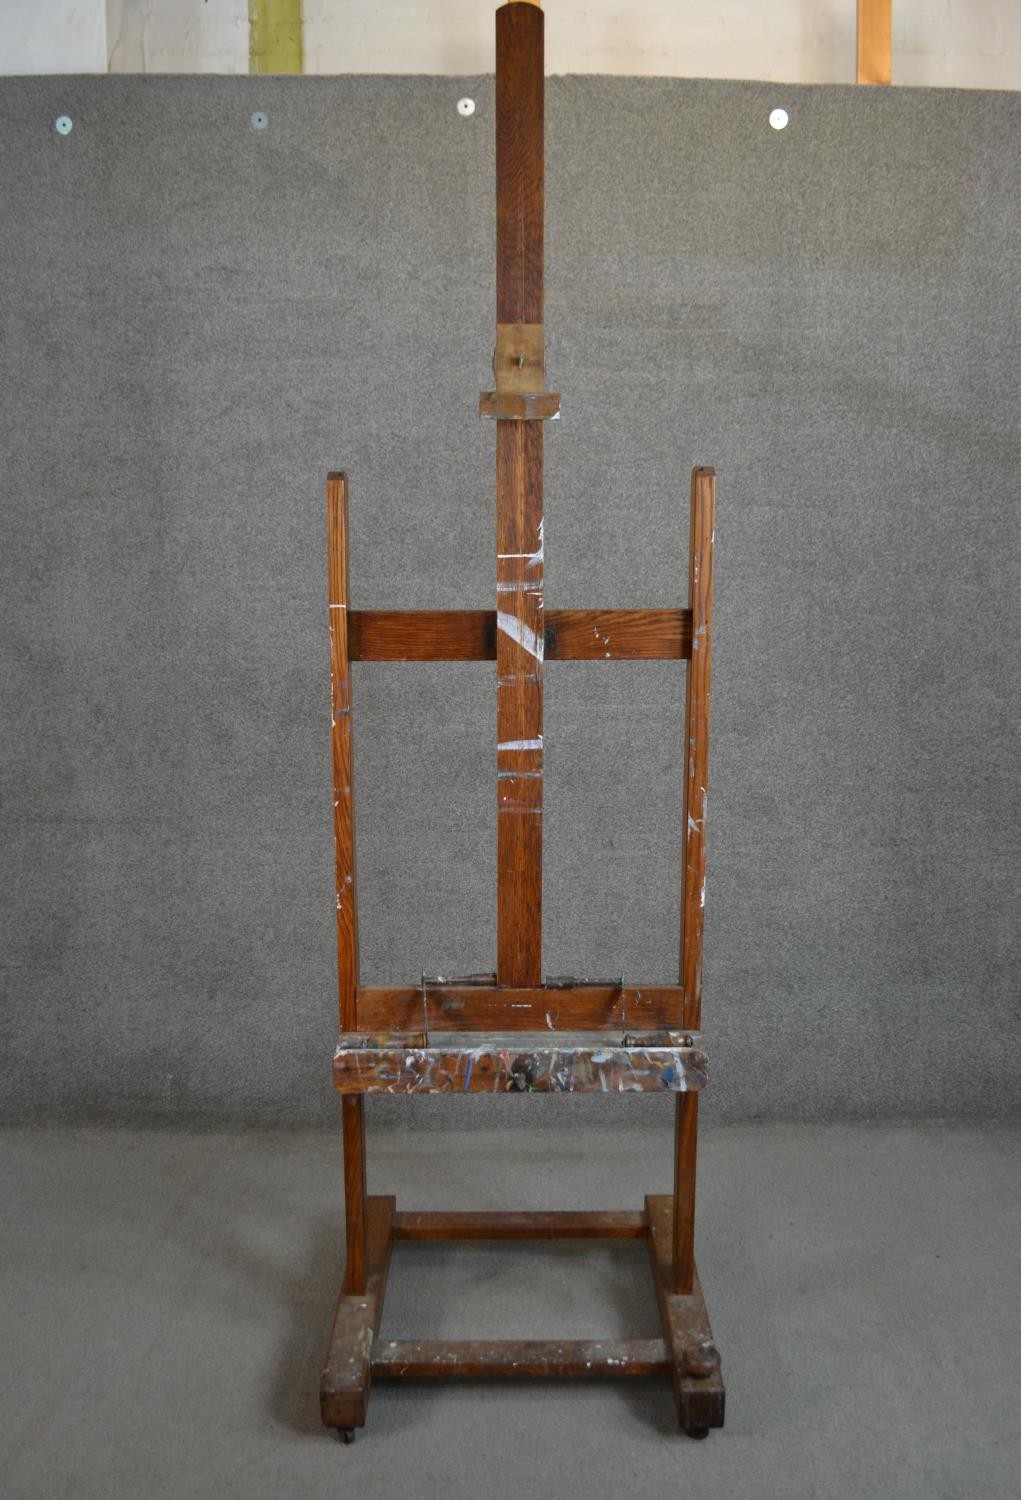 A late 19th/early 20th century oak artist's studio easel, with winders for raising and lowering - Image 5 of 7